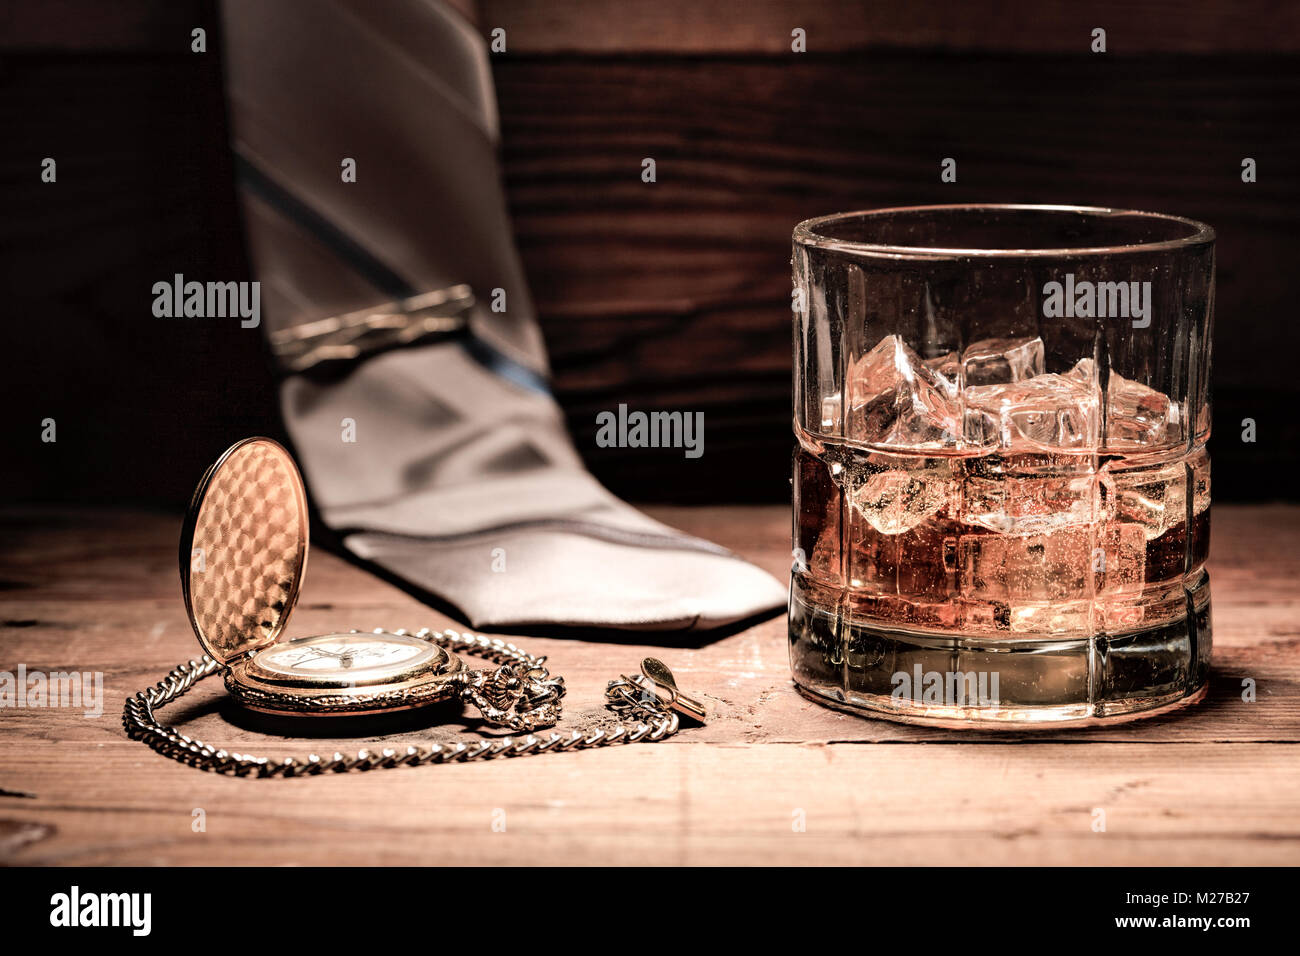 A conceptual image of aa glass of liquor, a pocket watch, and a neck tie. Stock Photo